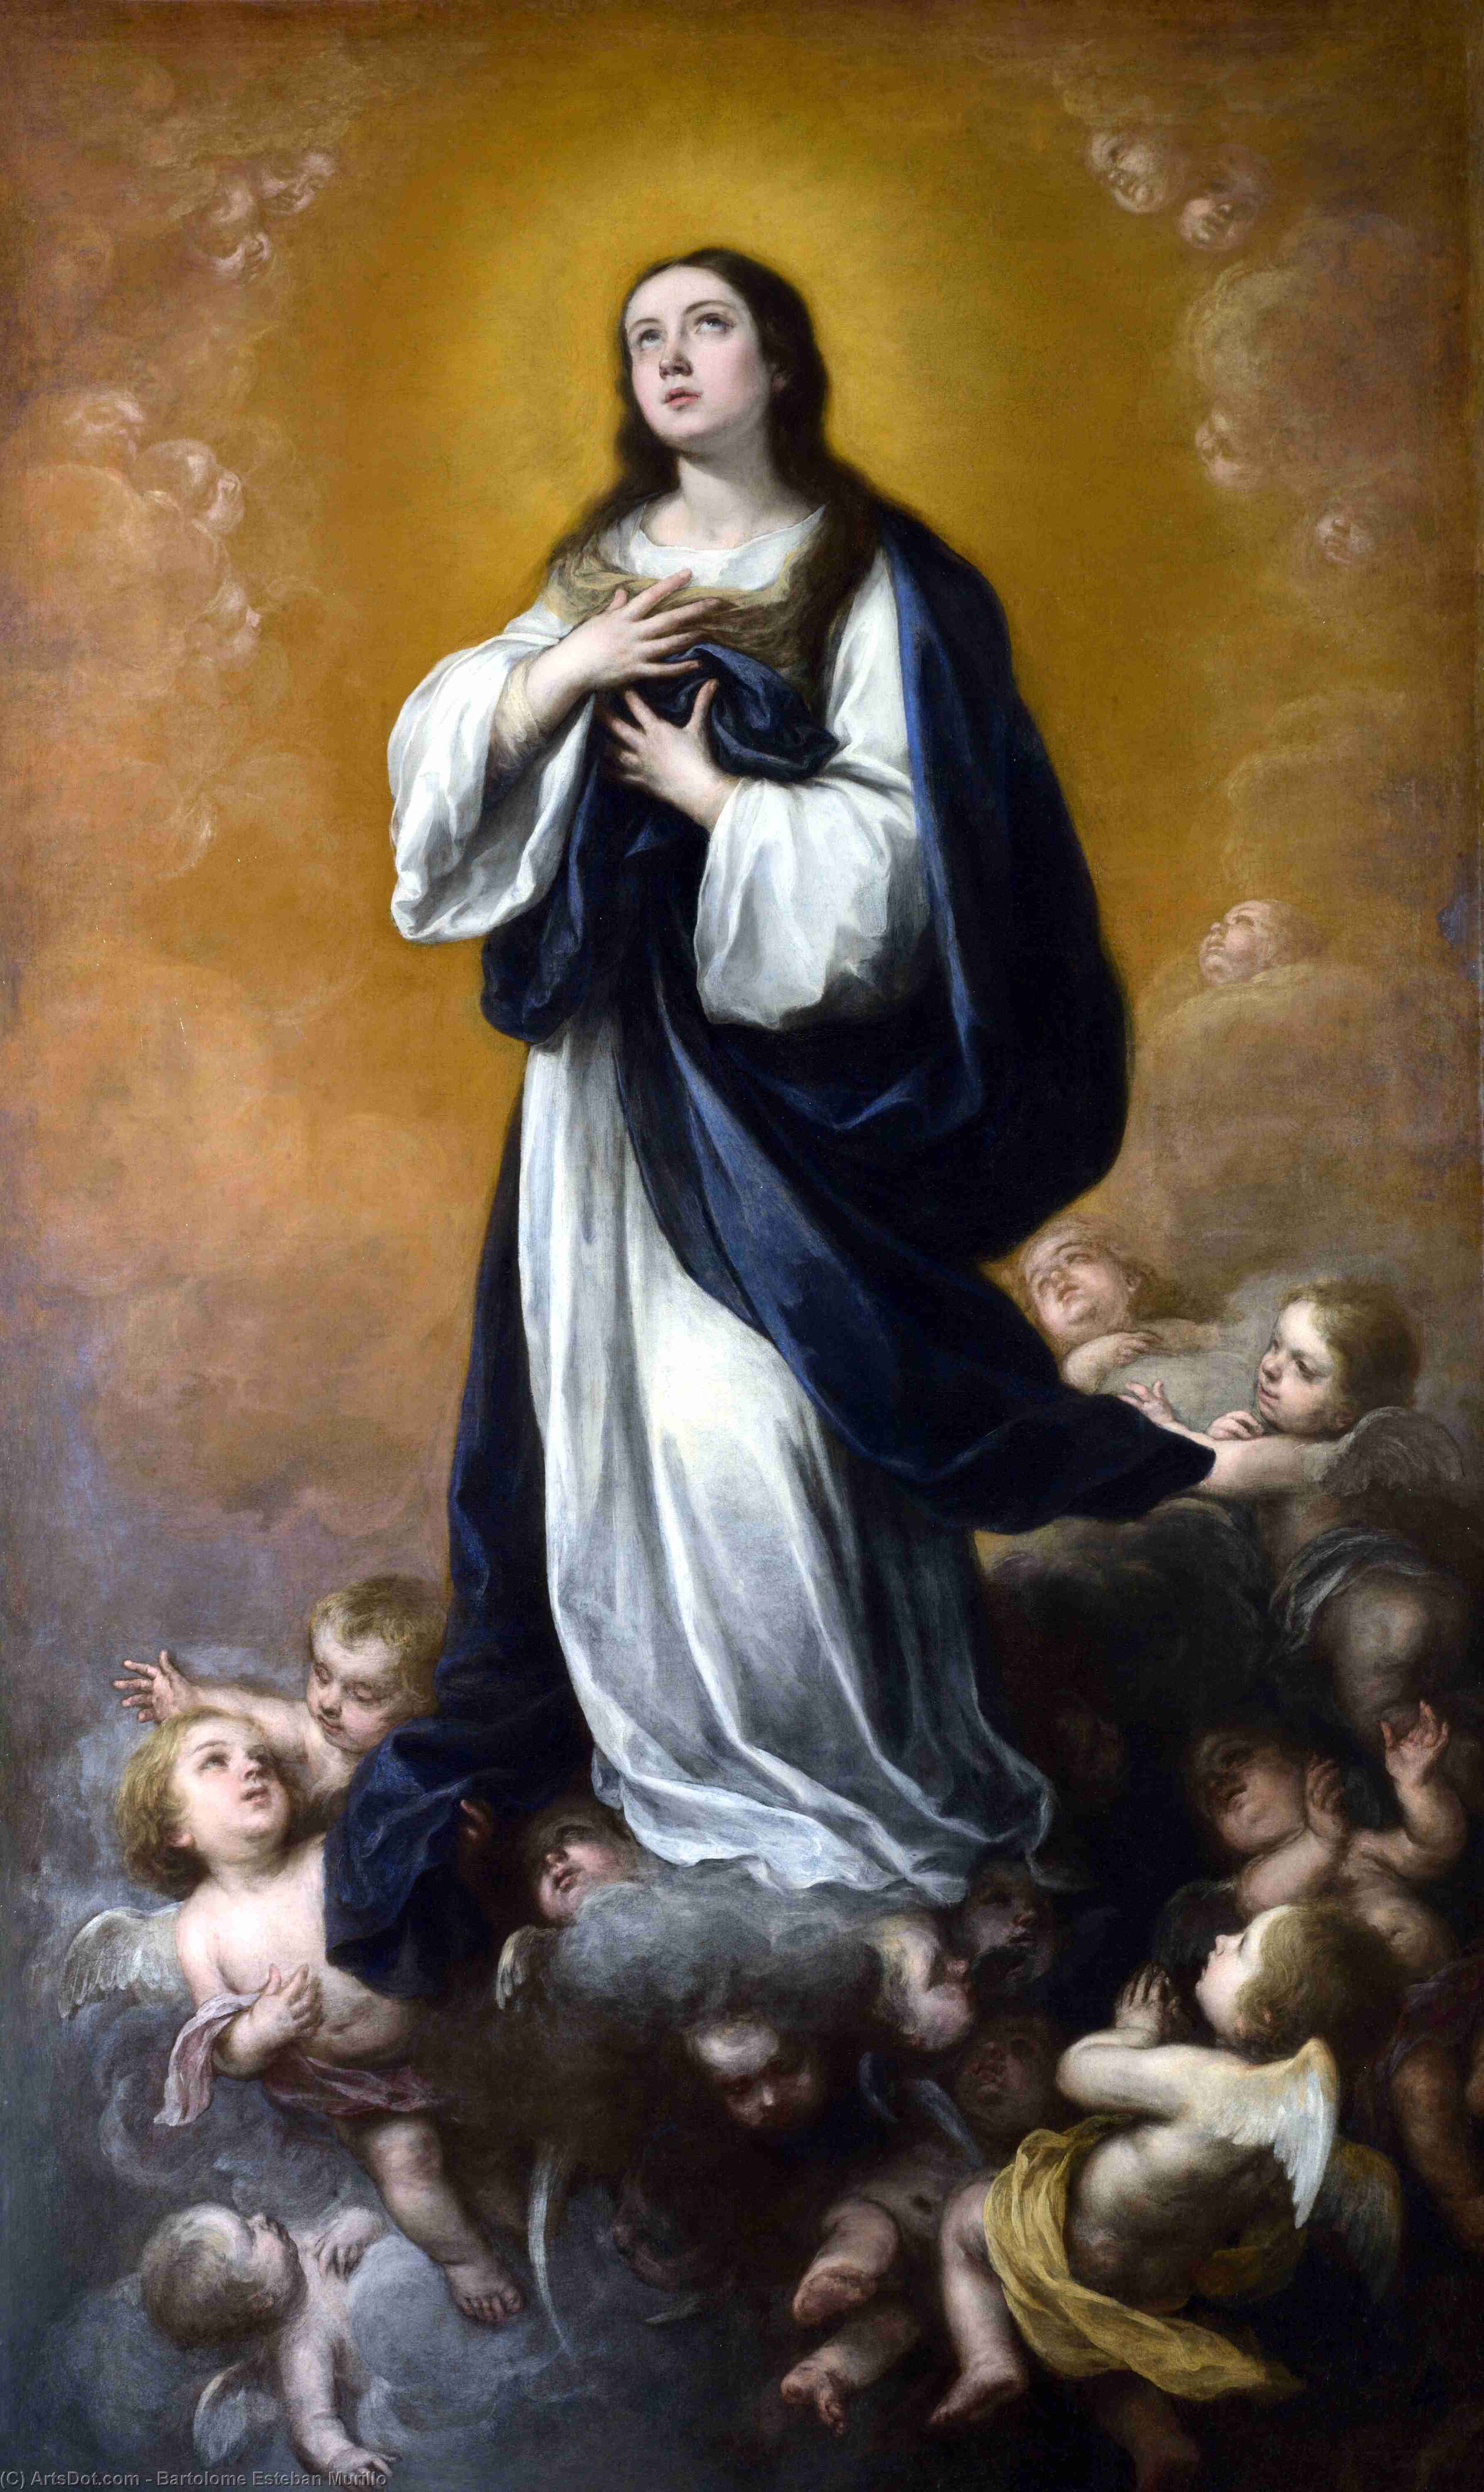 WikiOO.org - 백과 사전 - 회화, 삽화 Bartolome Esteban Murillo - The Immaculate Conception of the Virgin